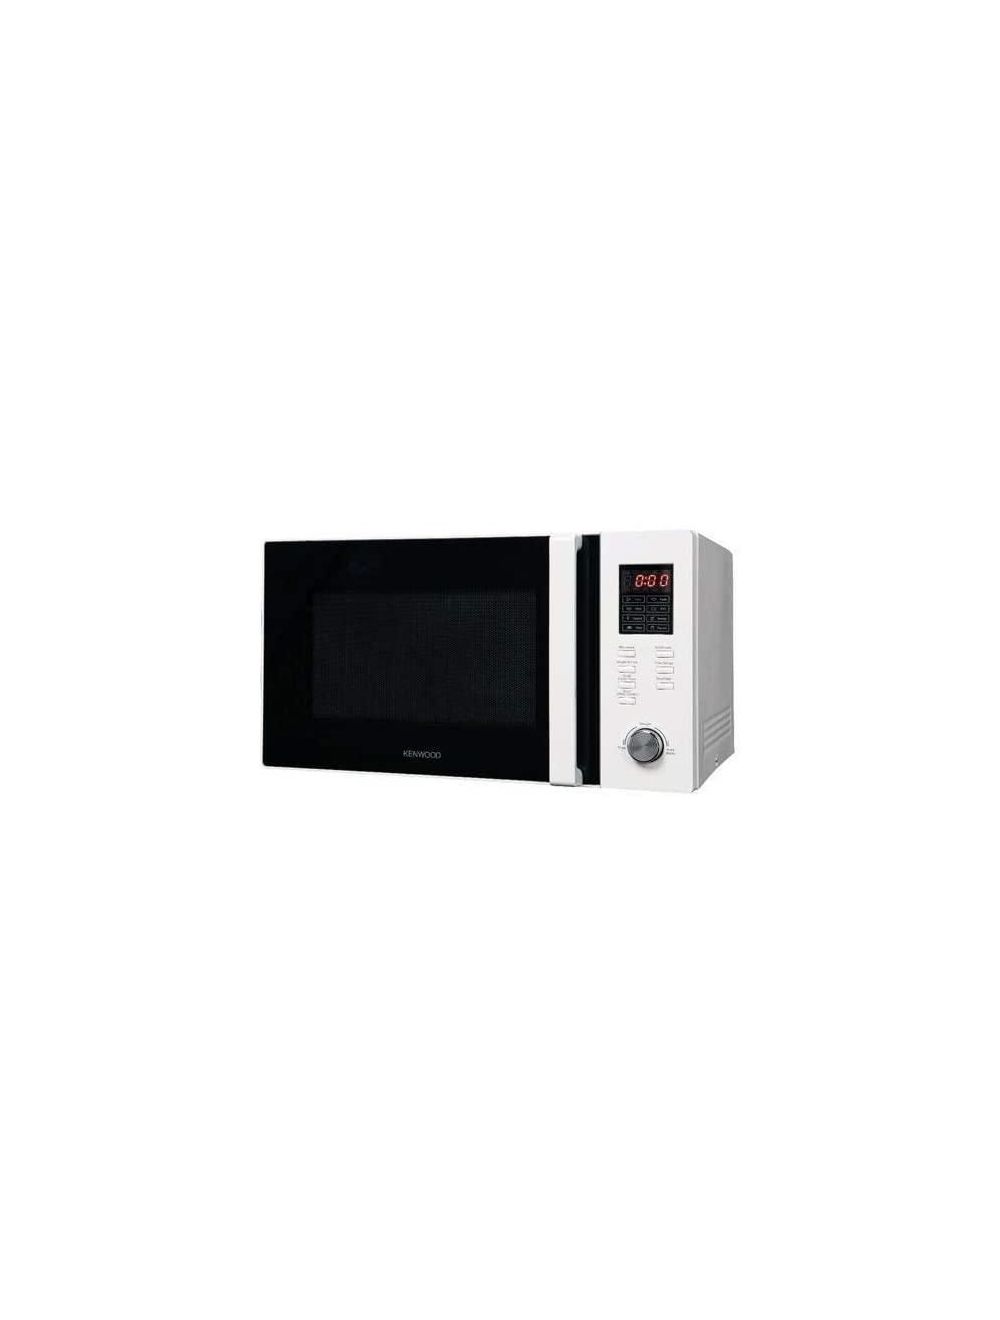 Kenwood 25 Litres Microwave Oven White-MWL210